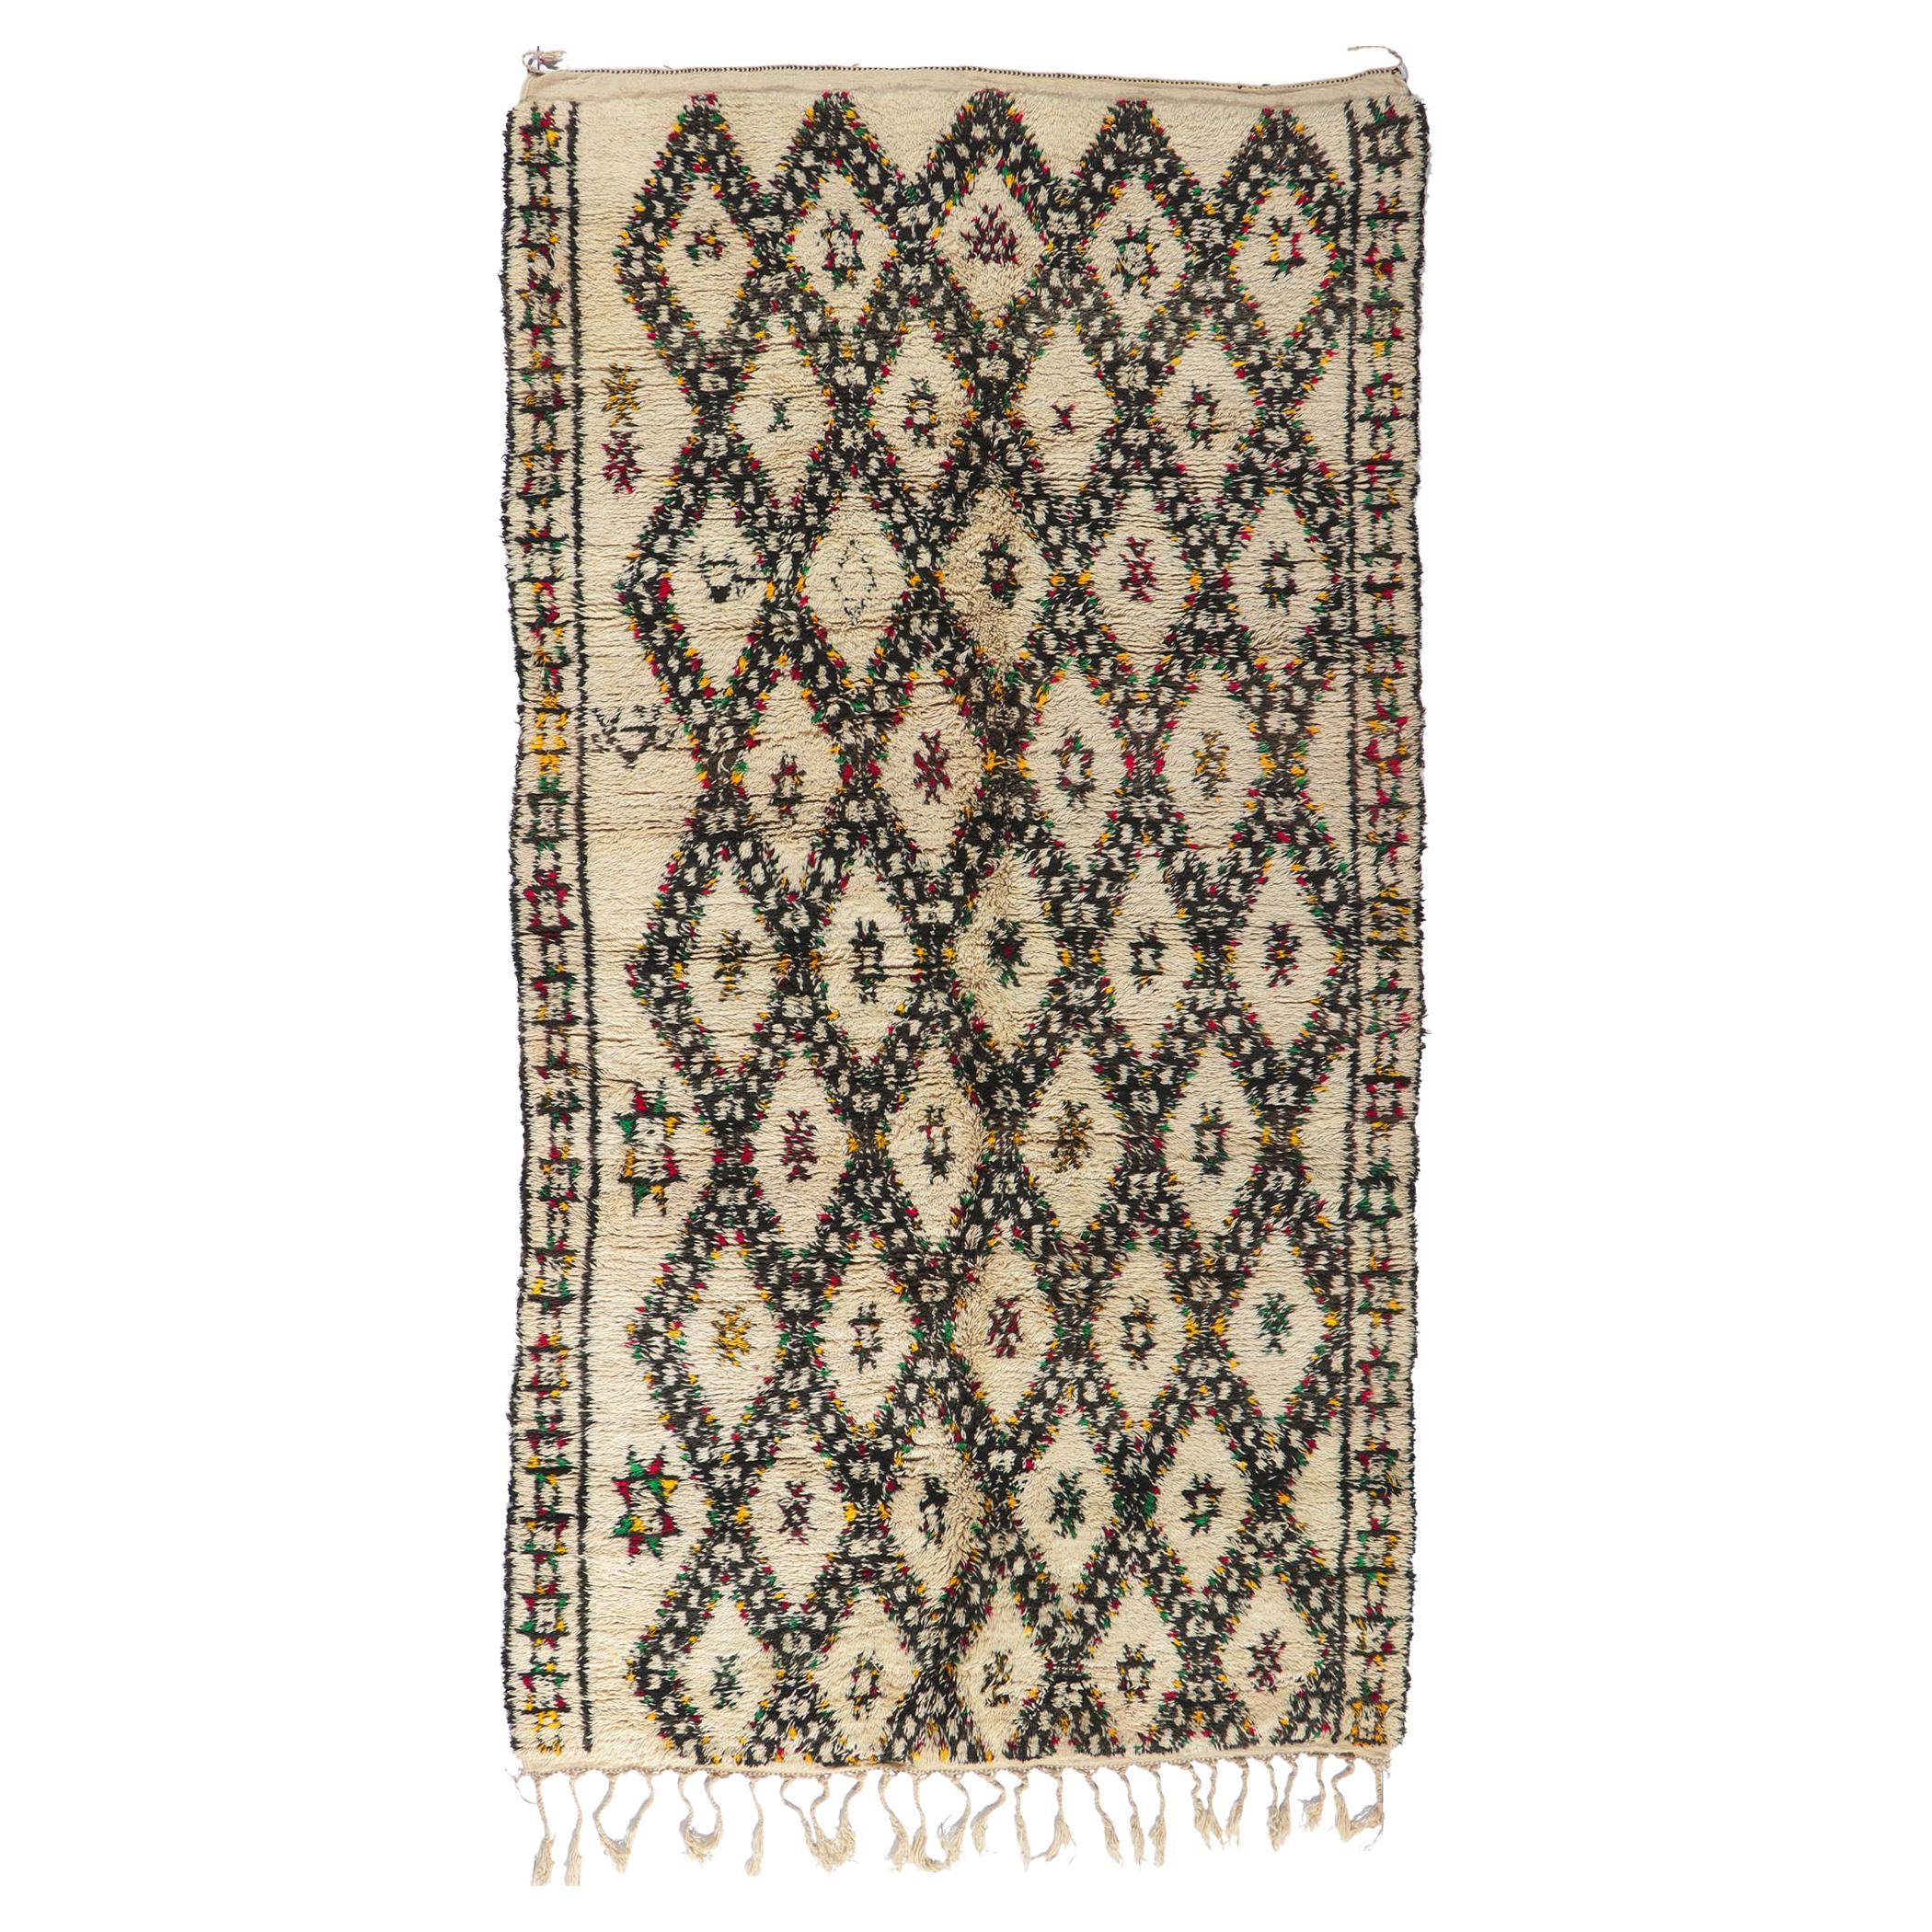 Vintage Moroccan Beni Ourain Rug, Midcentury Boho Meets Tribal Enchantment For Sale